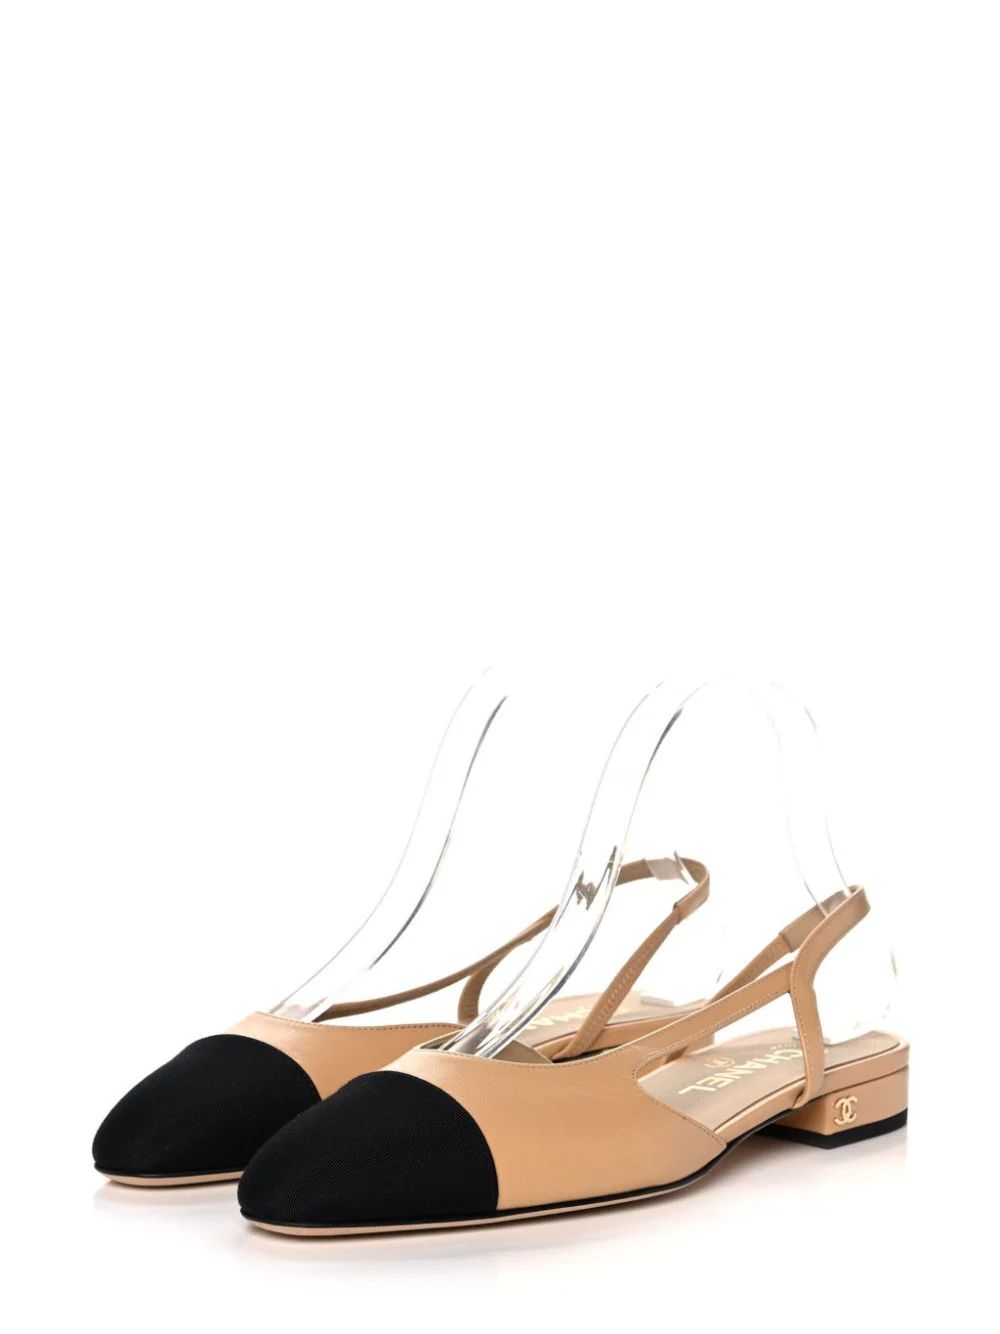 CHANEL Pre-Owned Slingback Leather Ballerina Shoes - Farfetch | Farfetch Global